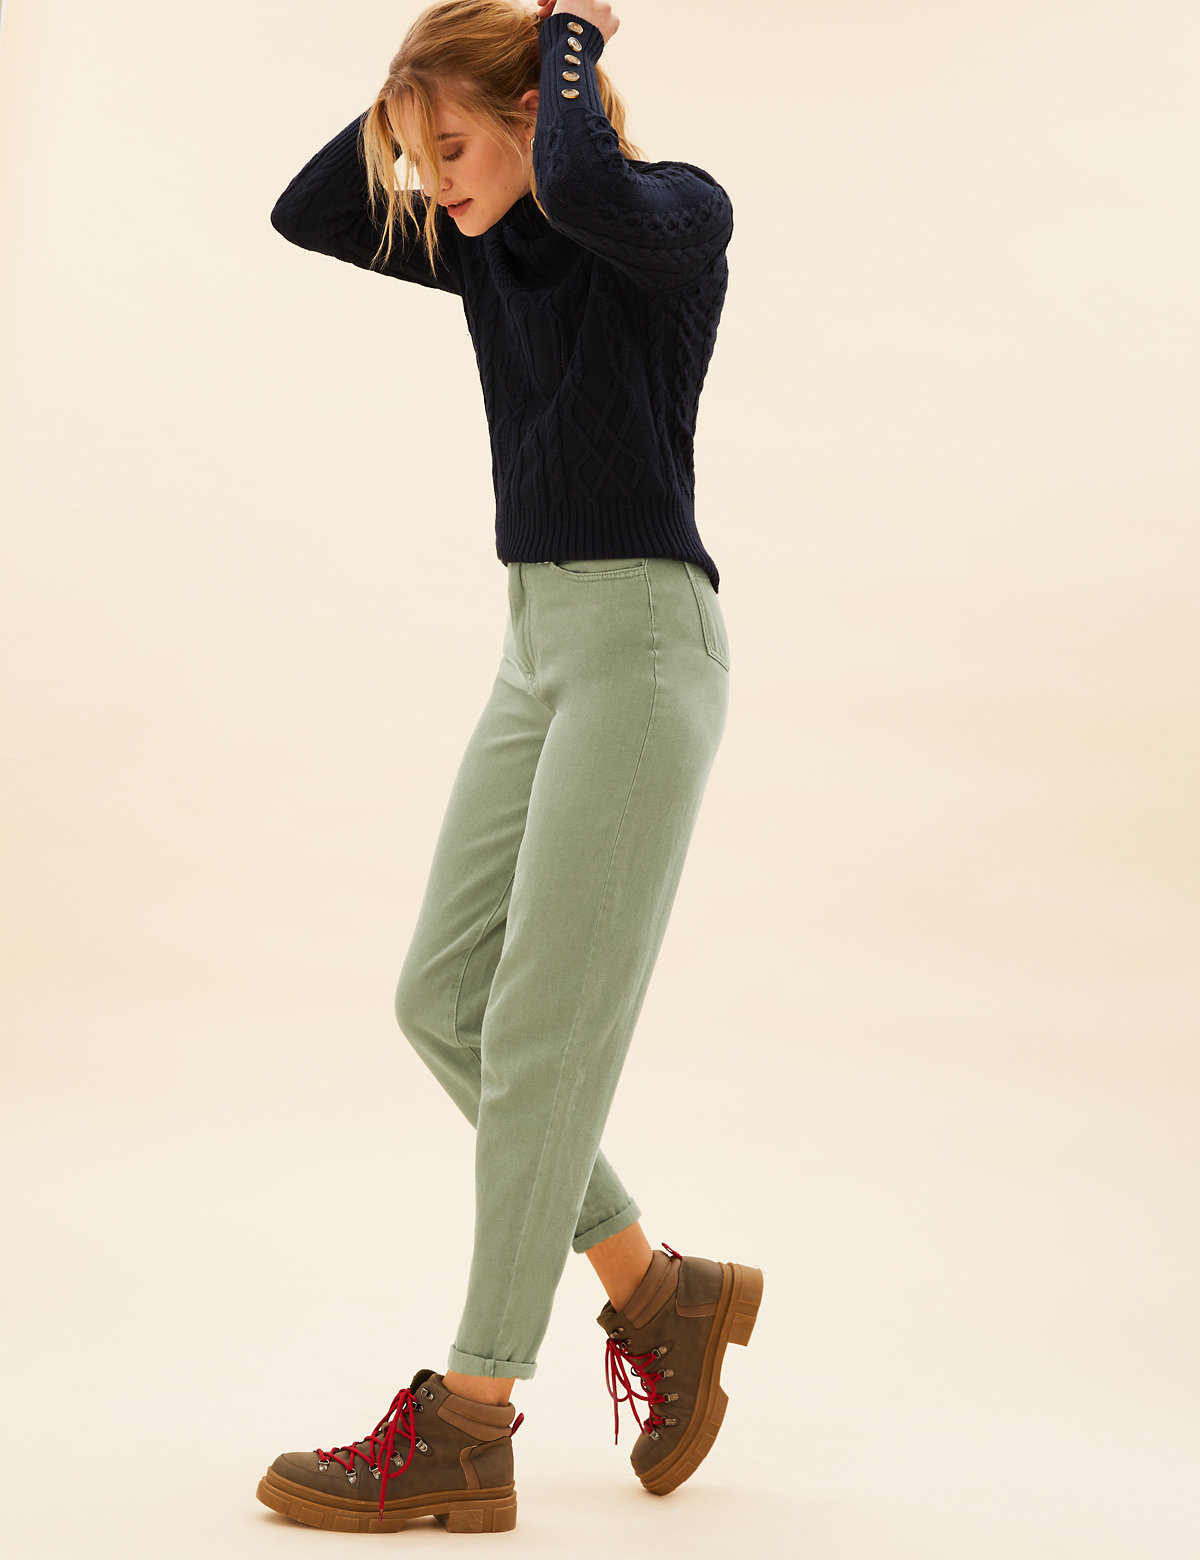 Pure Cotton Belted Tapered Trousers